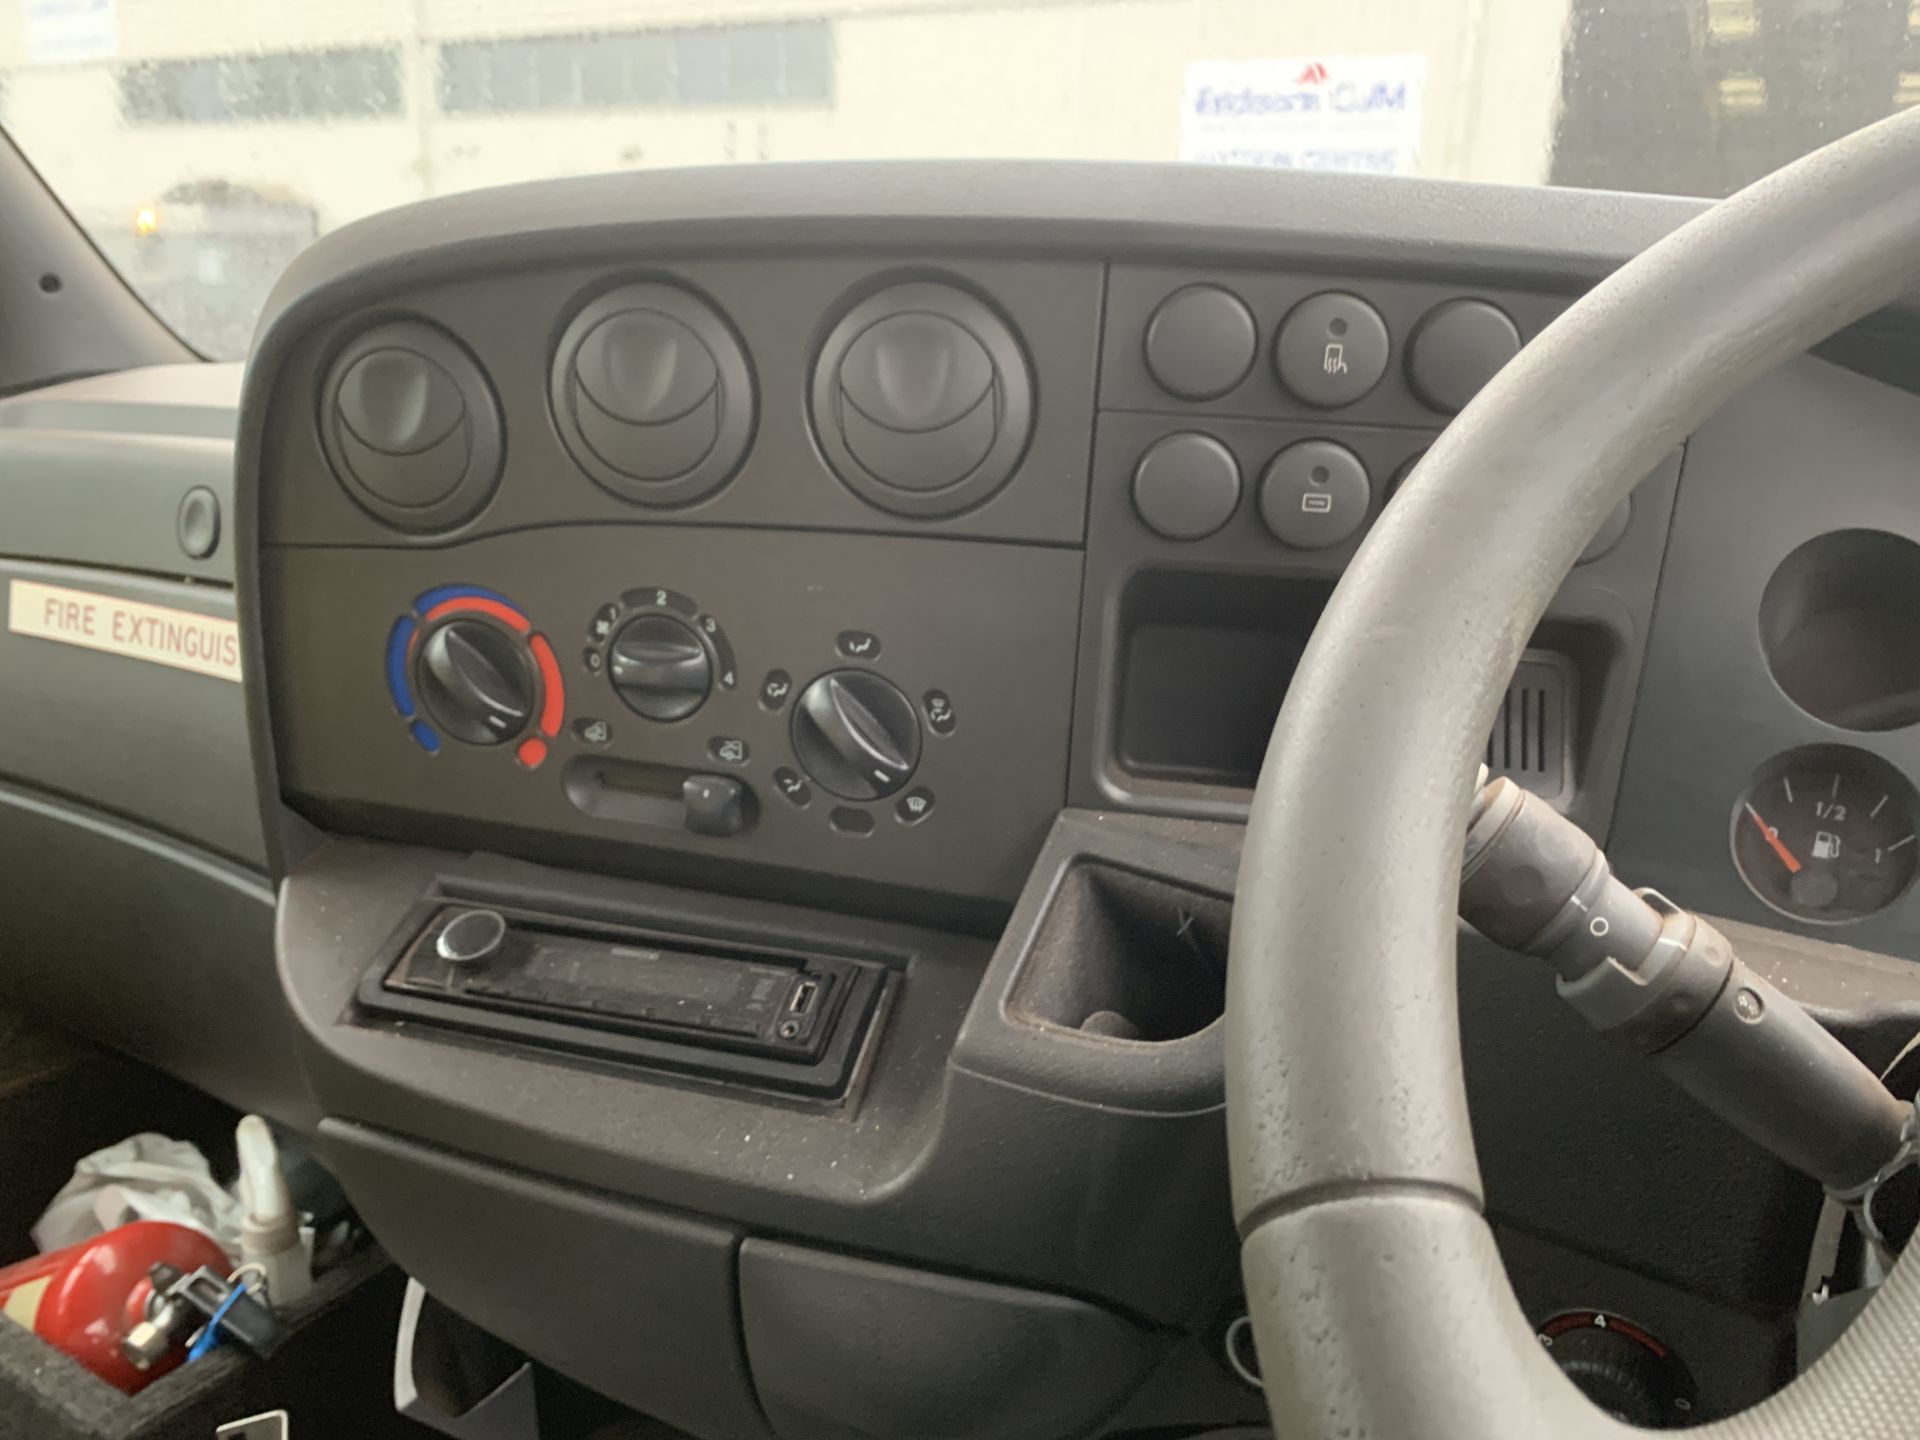 Iveco Daily 3.0 HPi LWB Minibus - Image 11 of 12